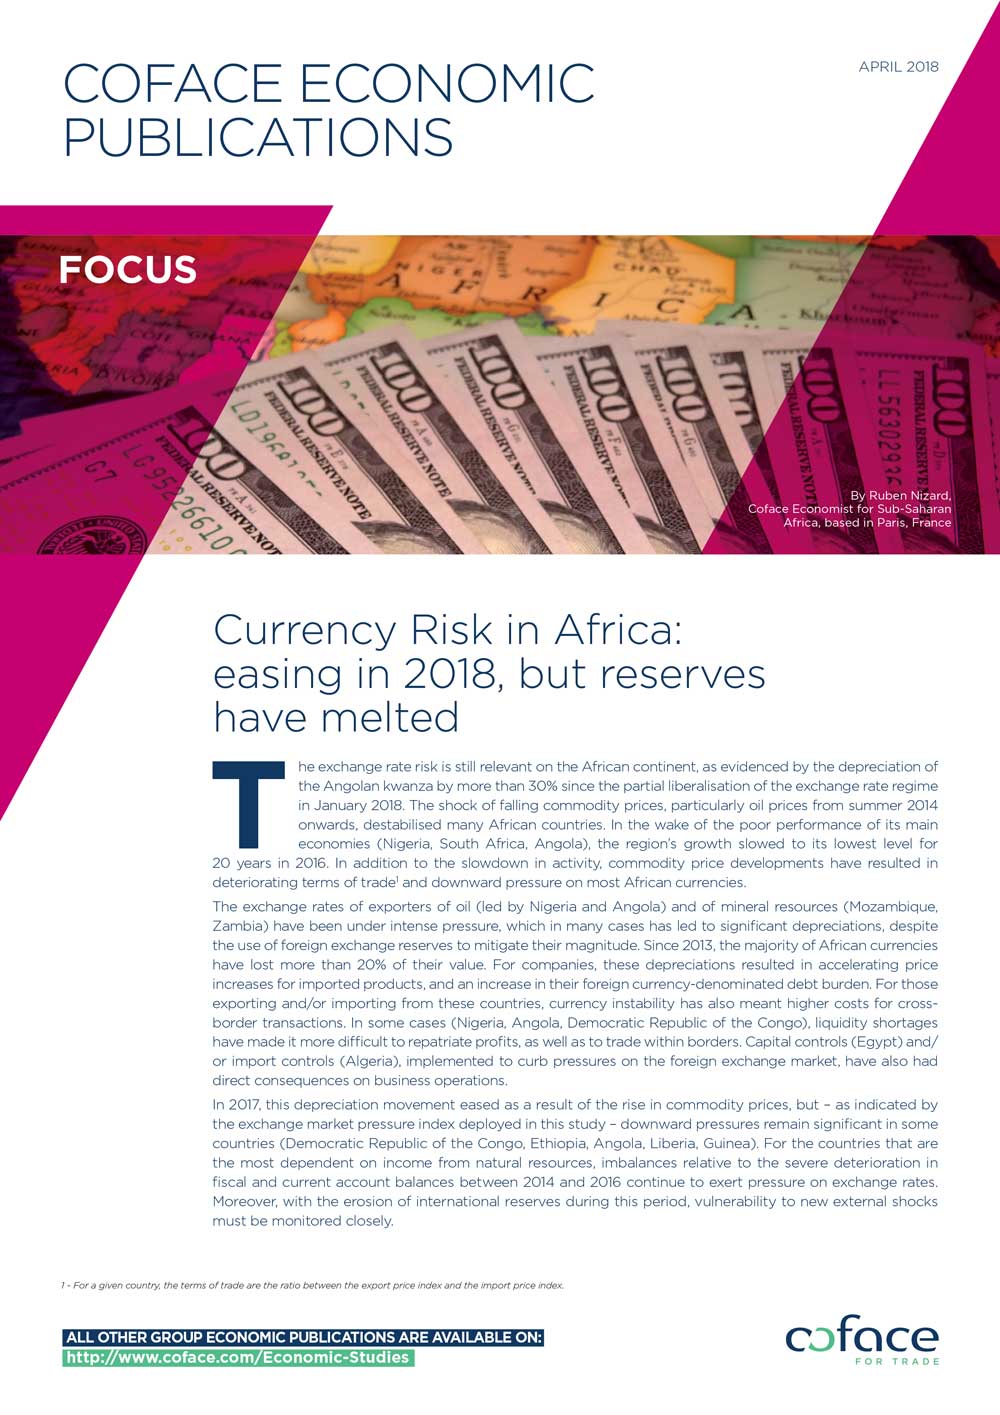 Currency Risk in Africa: easing in 2018, but reserves have melted